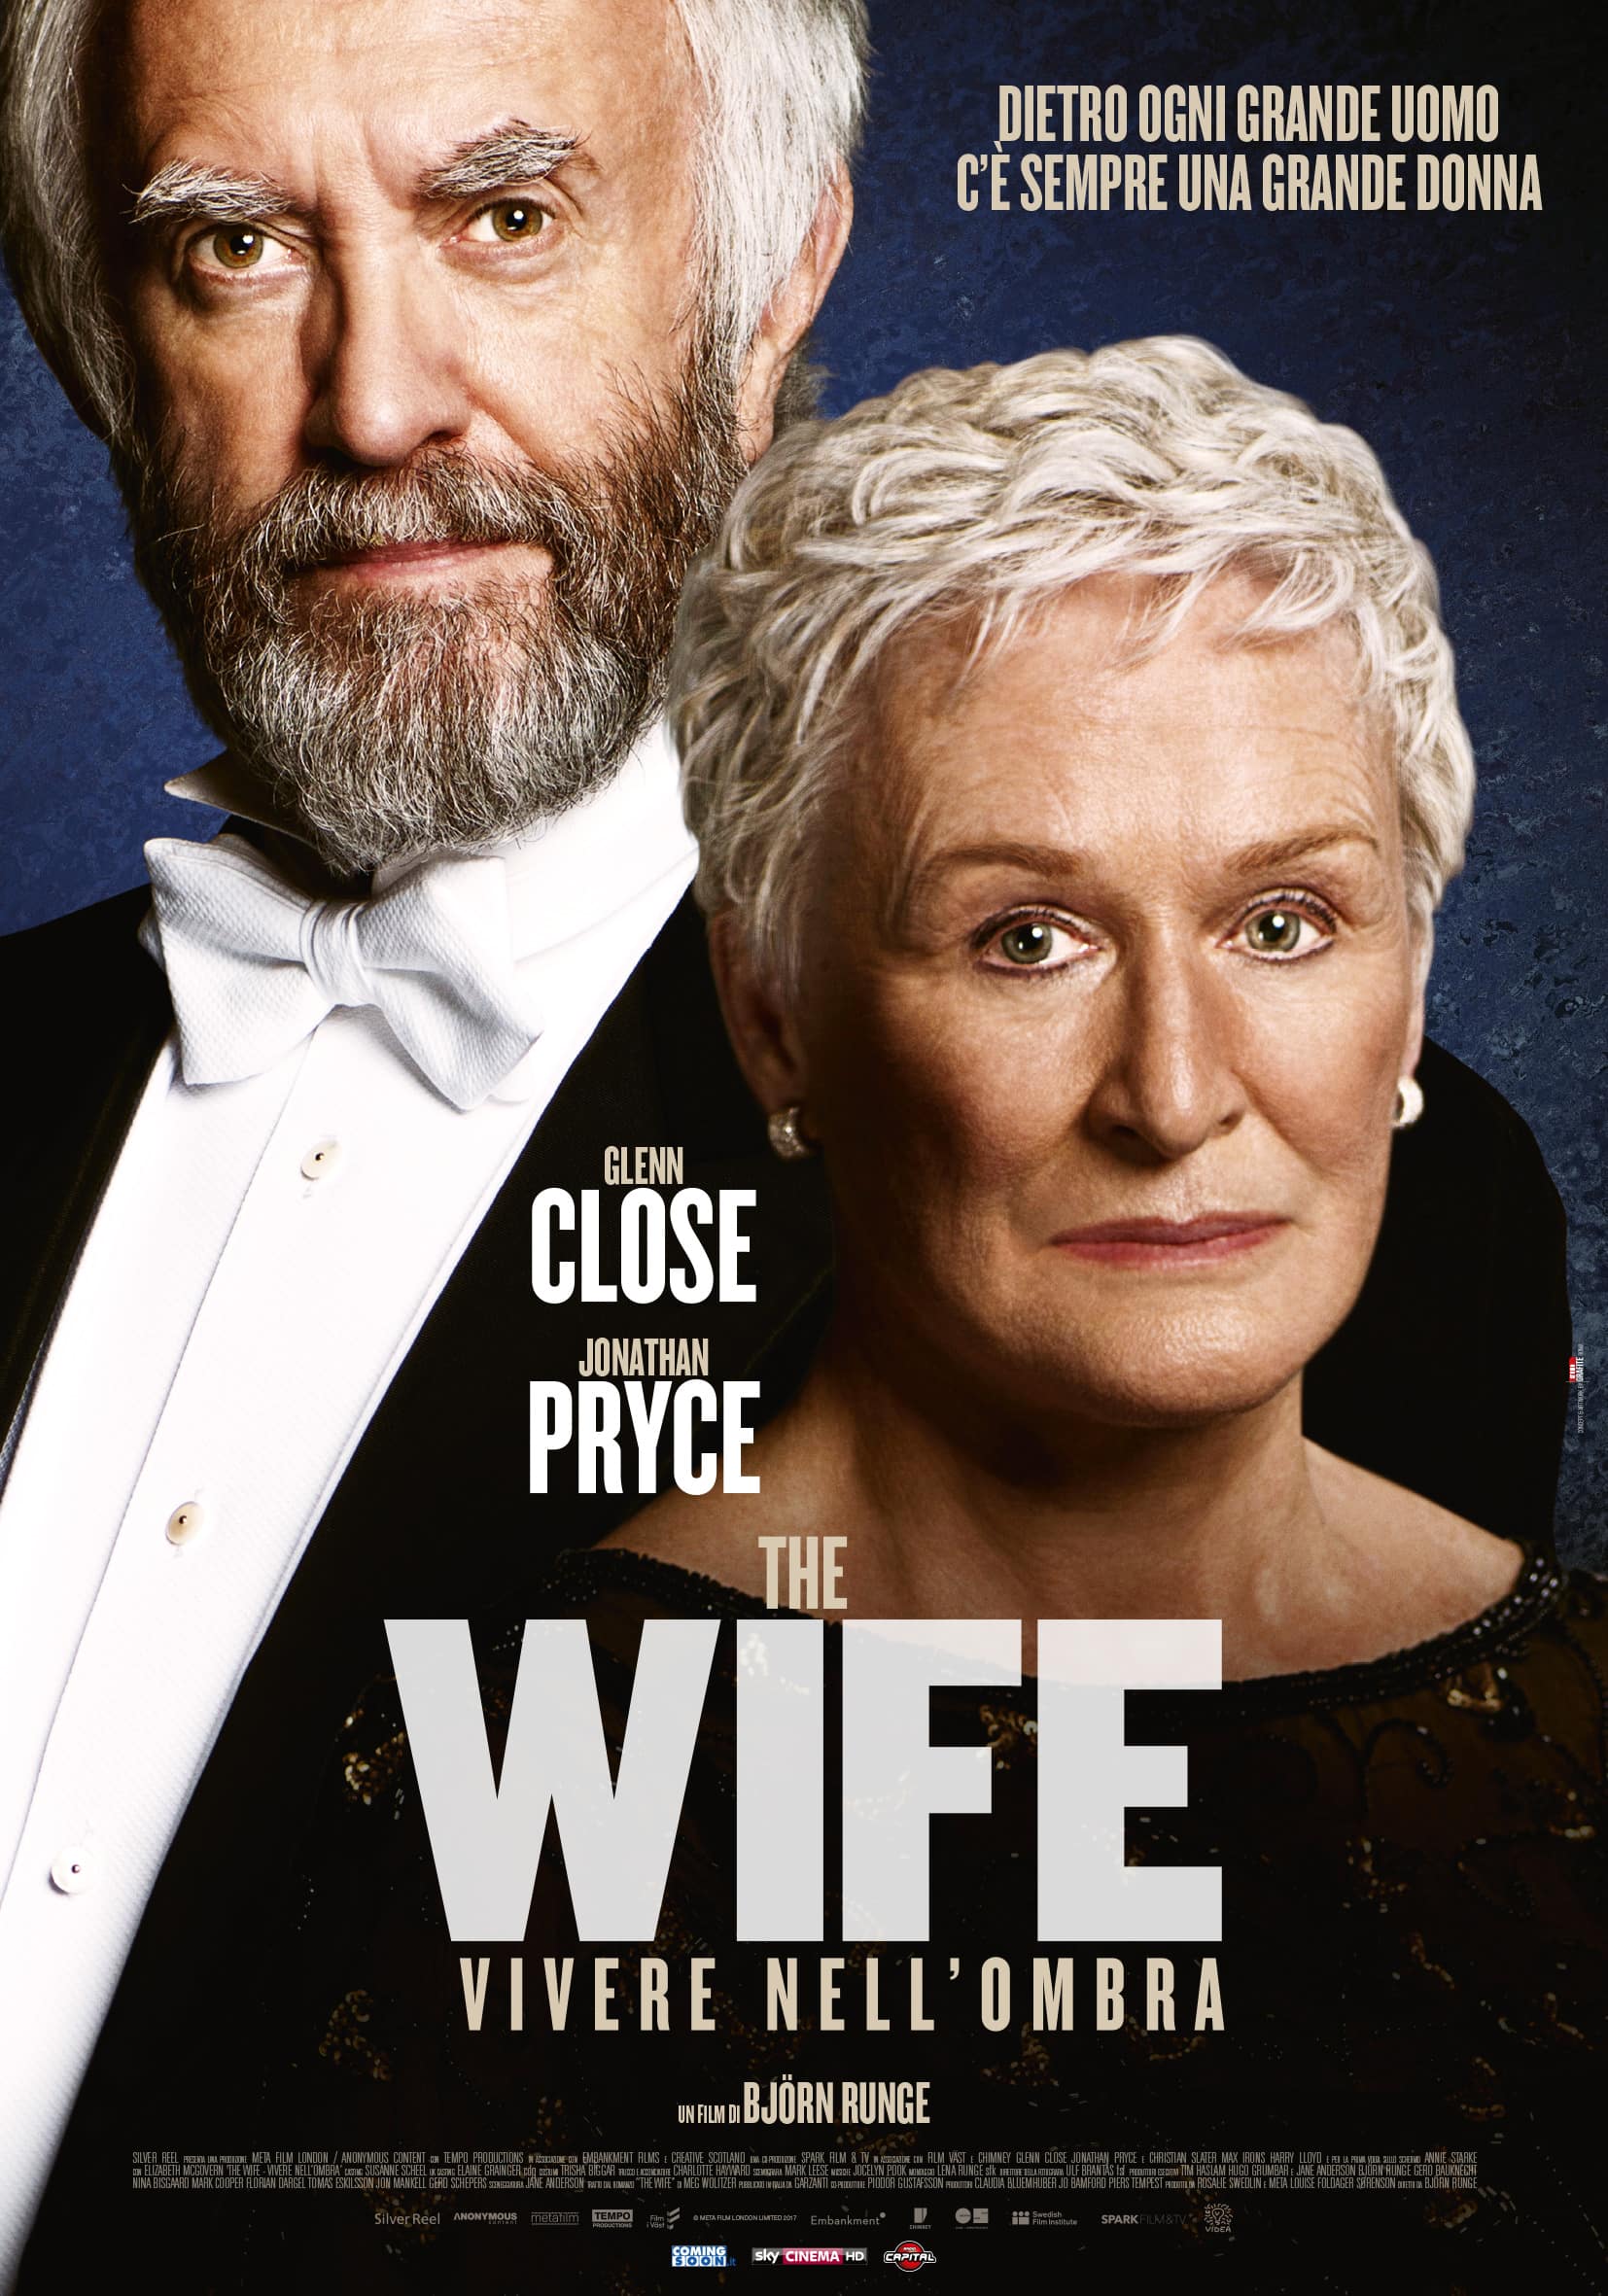 The Wife - vivere nell'ombra, cinematographe.it